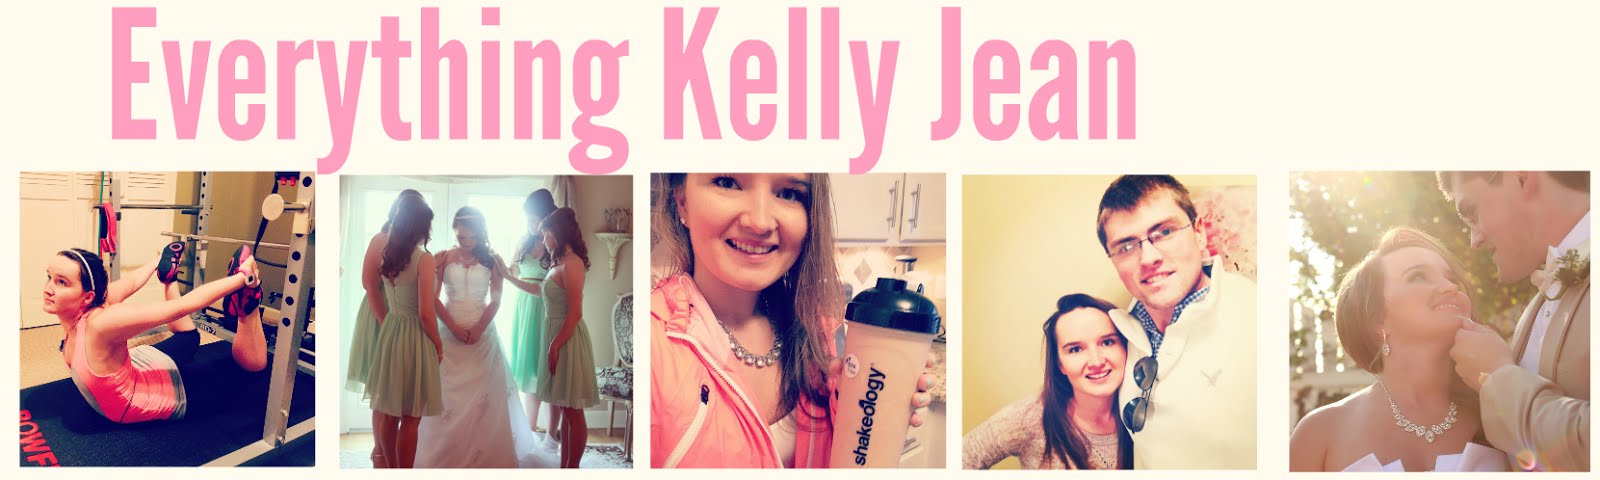 Everything Kelly Jean